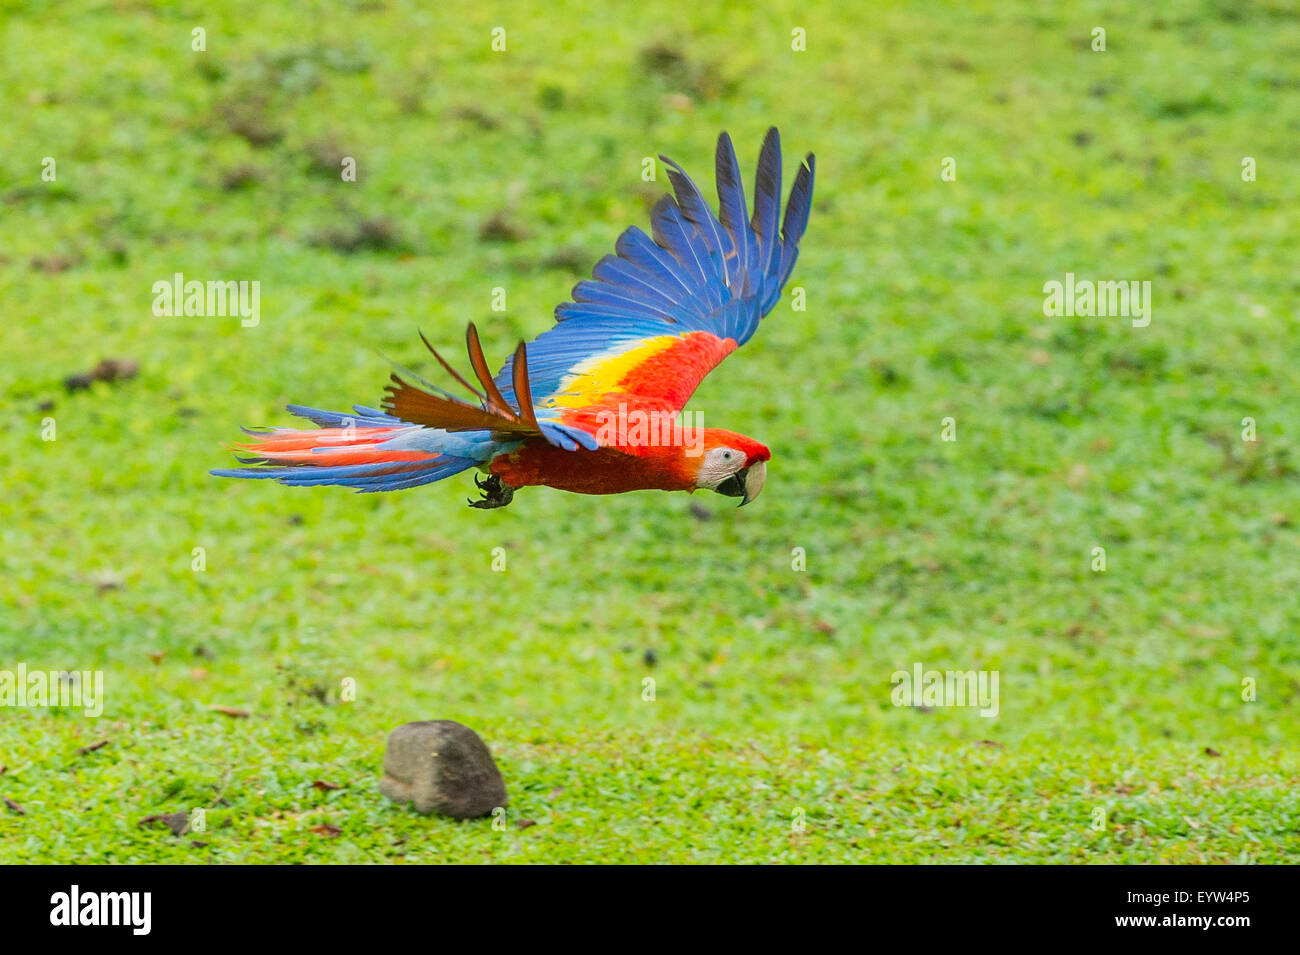 A Scarlet Macaw in flight Stock Photo